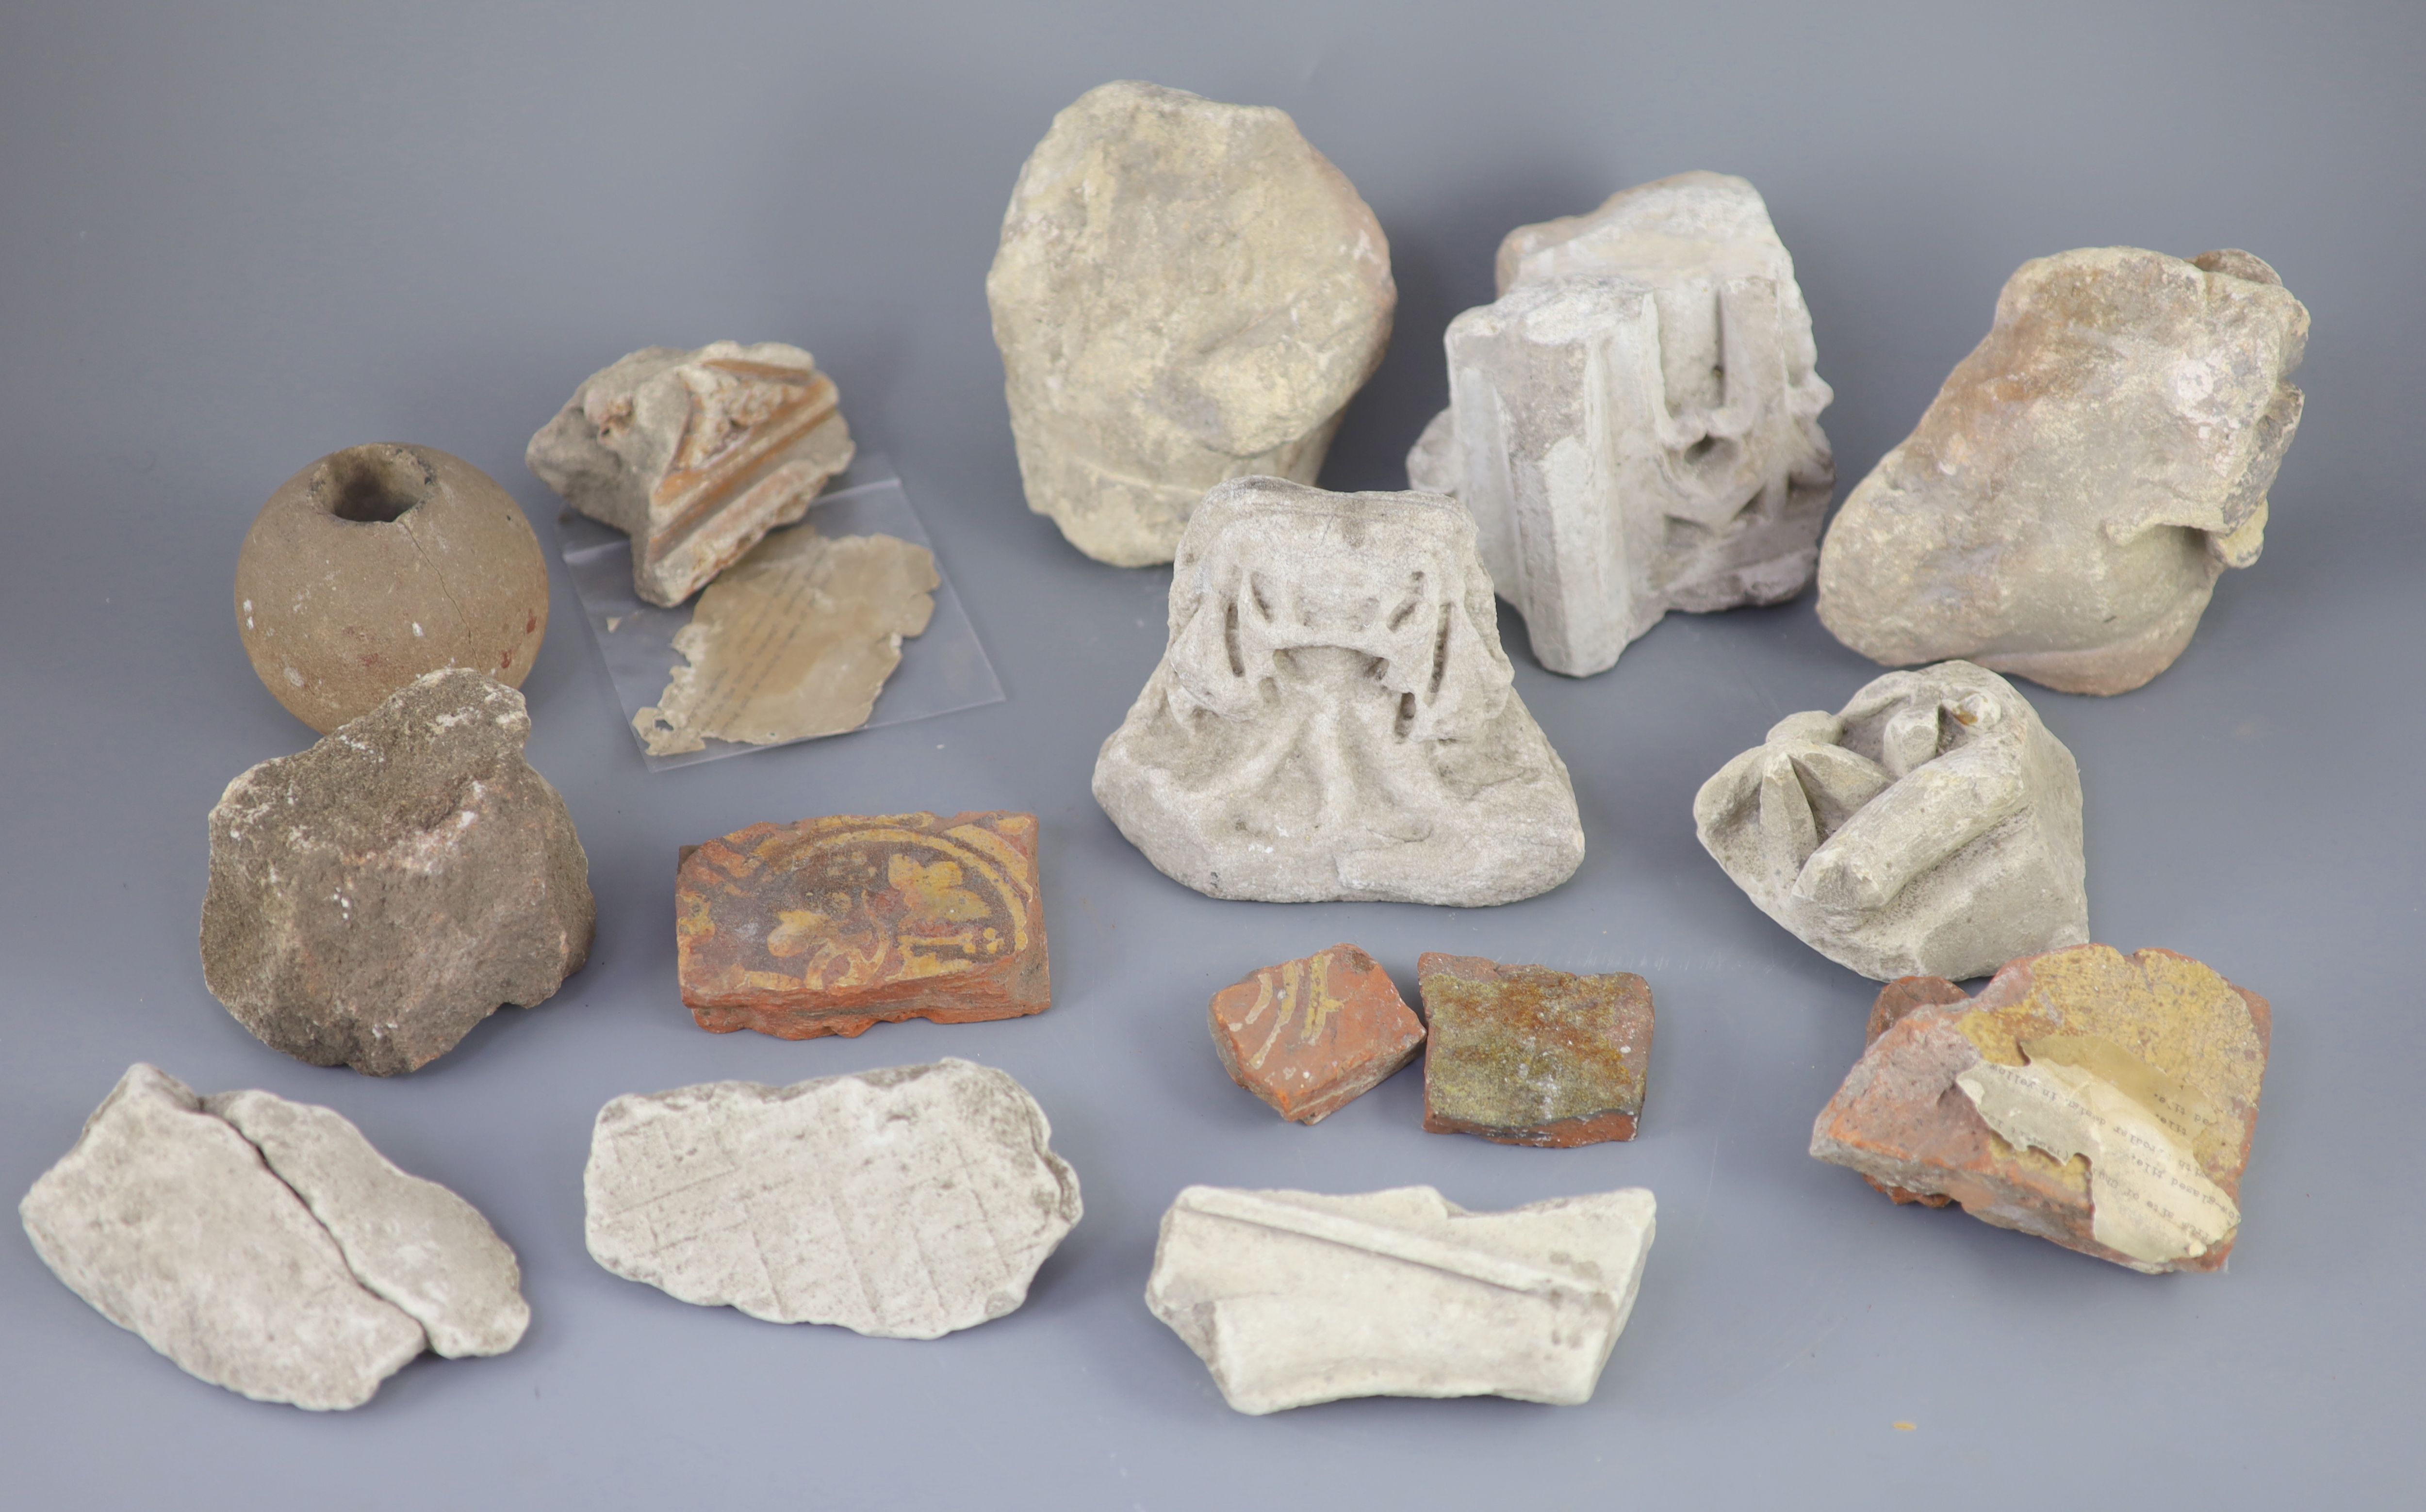 A group of English medieval church/priory architectural stonework and tile fragments, some pieces with inscribed labels of provenance,